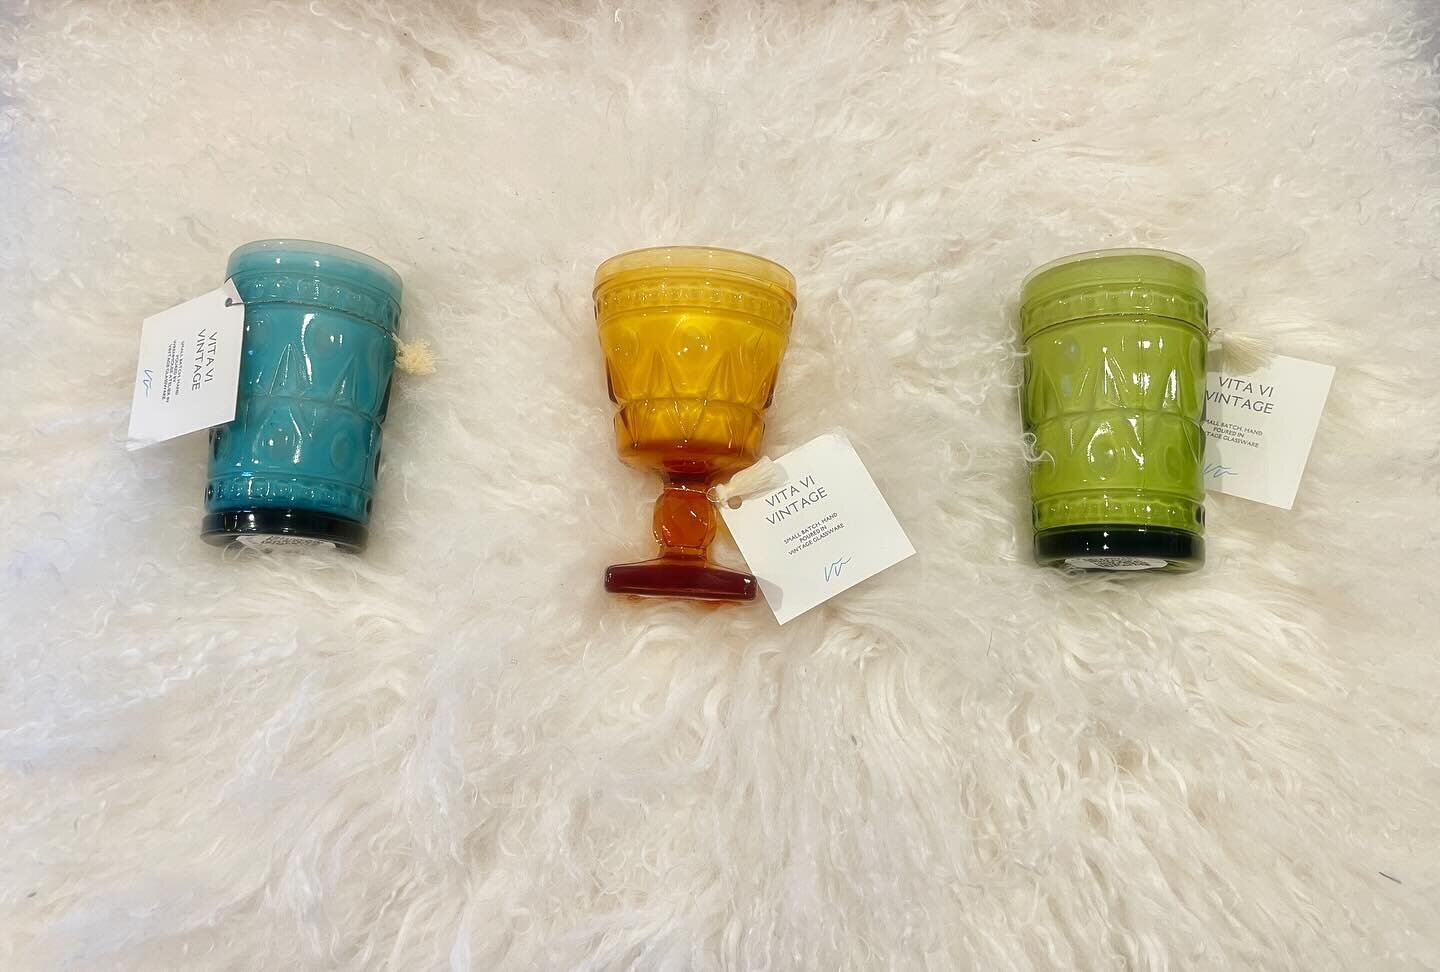 Which is your favorite? 1,2, or 3 🕯️
#prettythings #vintagelove #vintageglassware #betterthanfine #breathe #pausewithus #vitavi